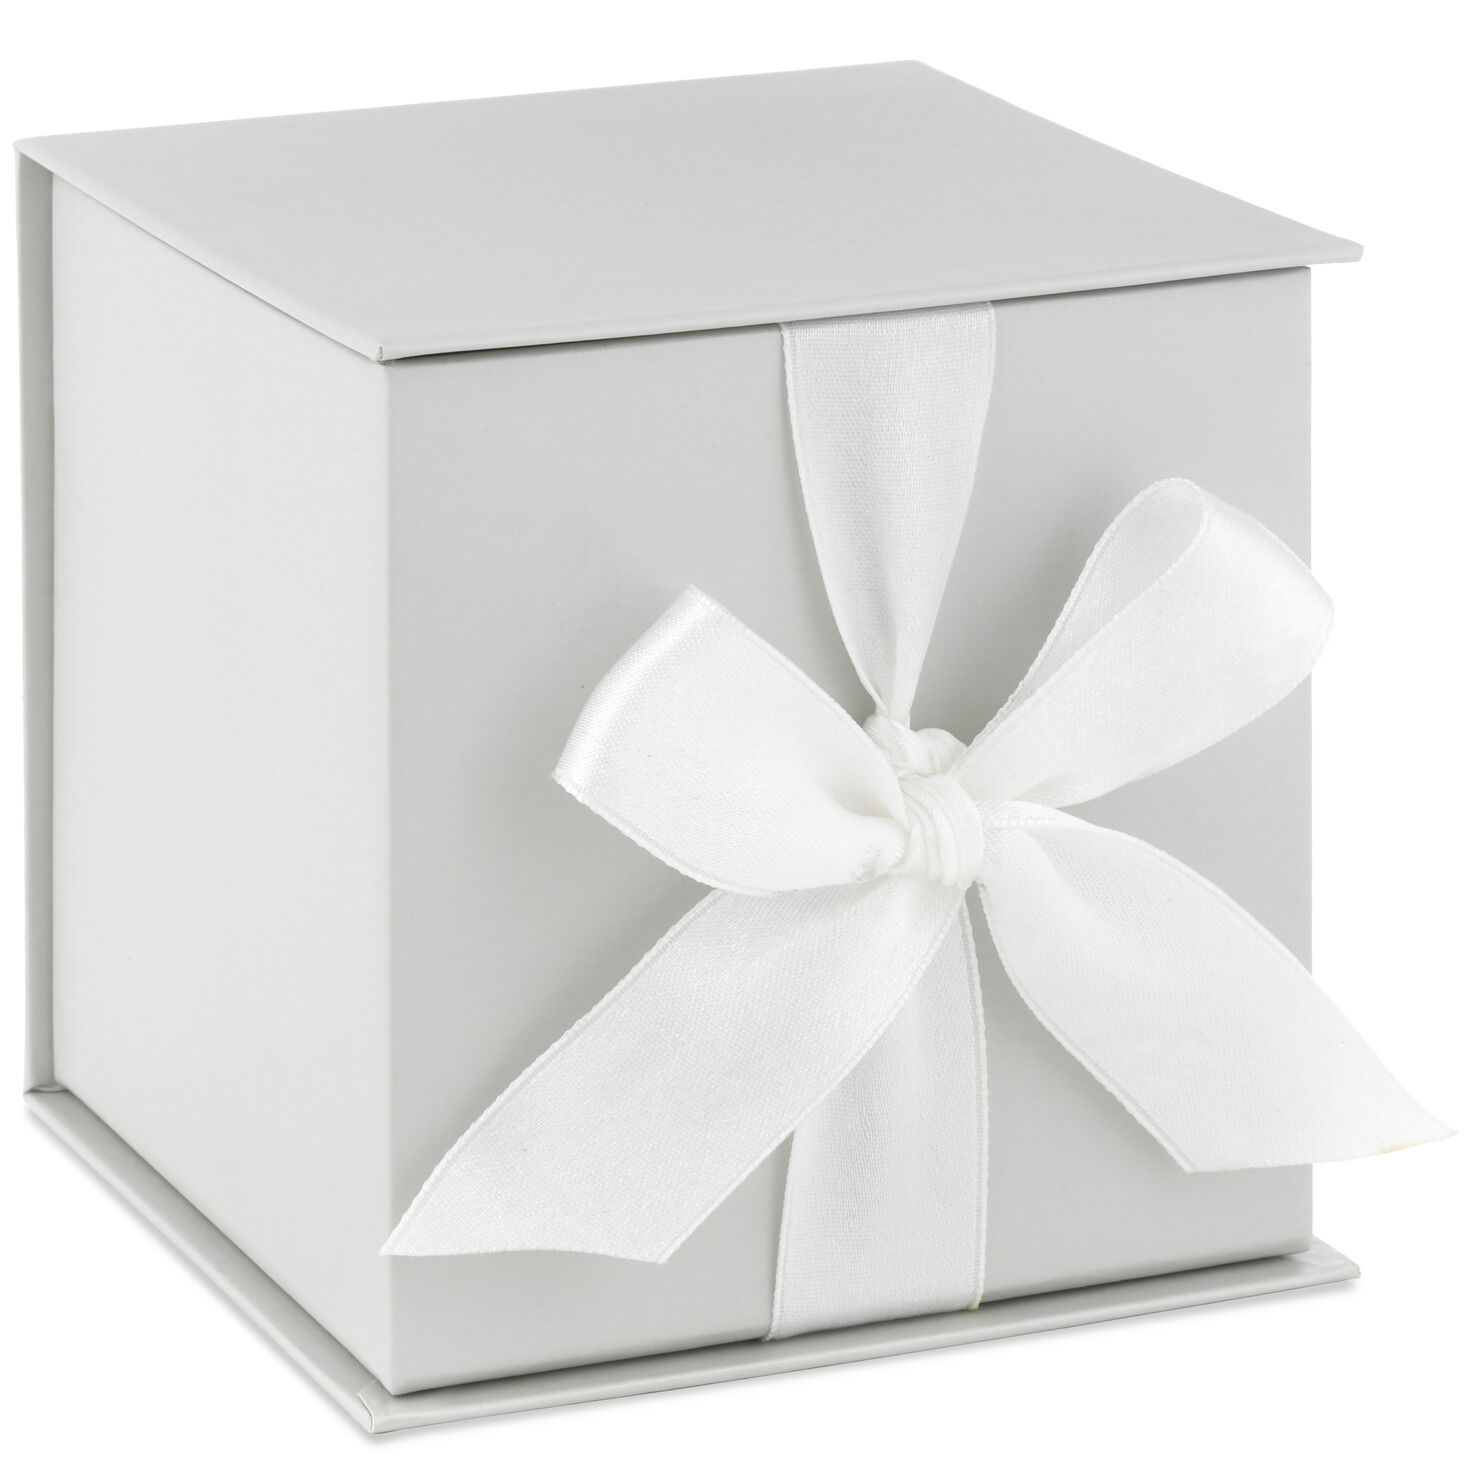 Shredded paper filler for gift boxes for the safety of your gifts